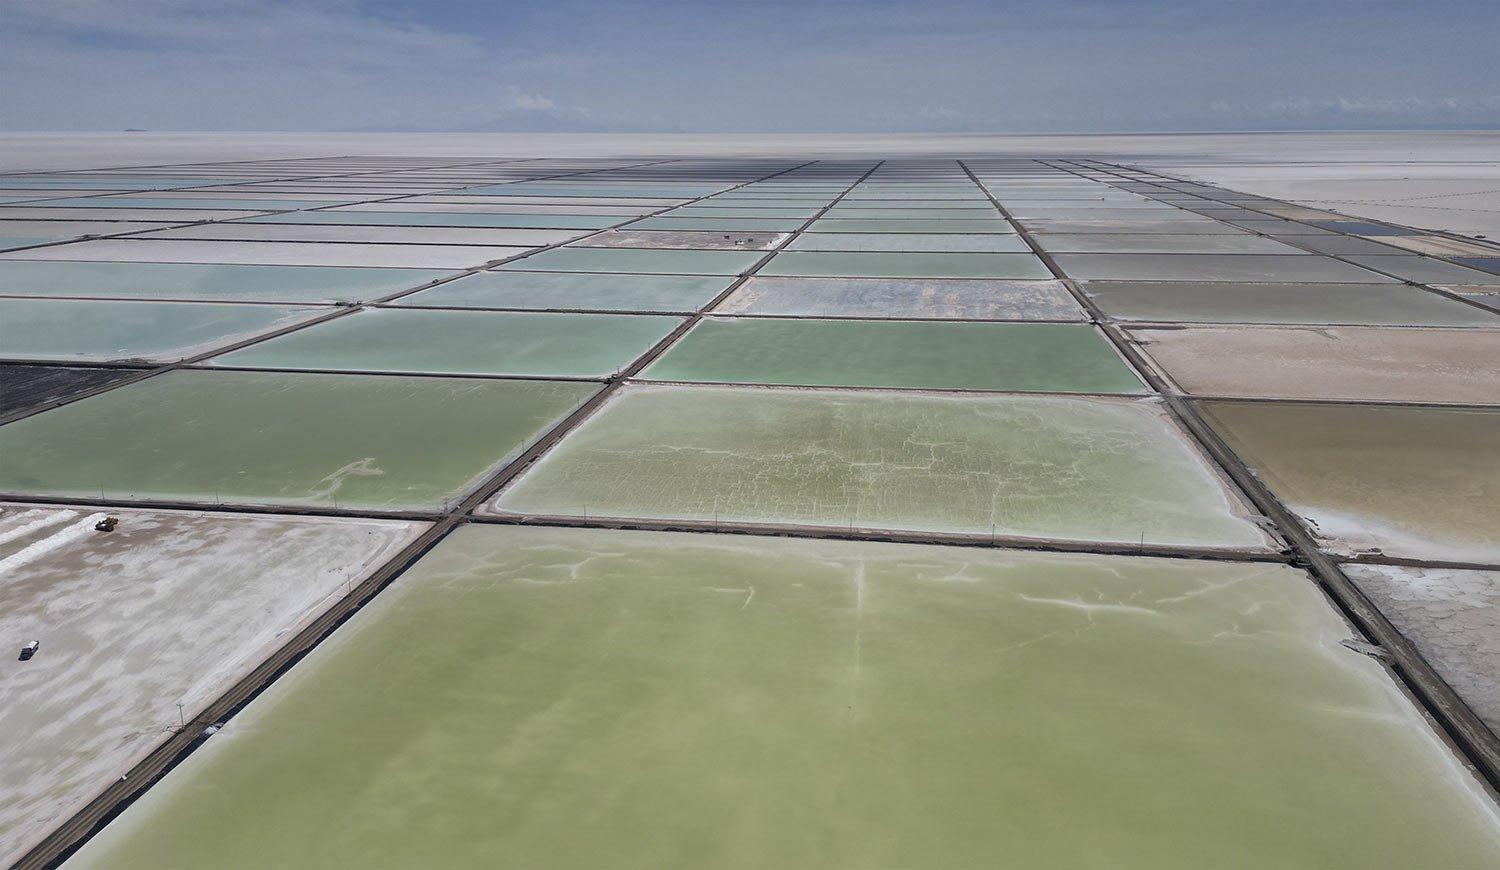  Salt recovery pools stand in different degrees of evaporation for an industrial plant that produces lithium carbonate to manufacture lithium batteries, after the plant's opening ceremony in the Uyuni salt desert on the outskirts of Llipi, Bolivia, D